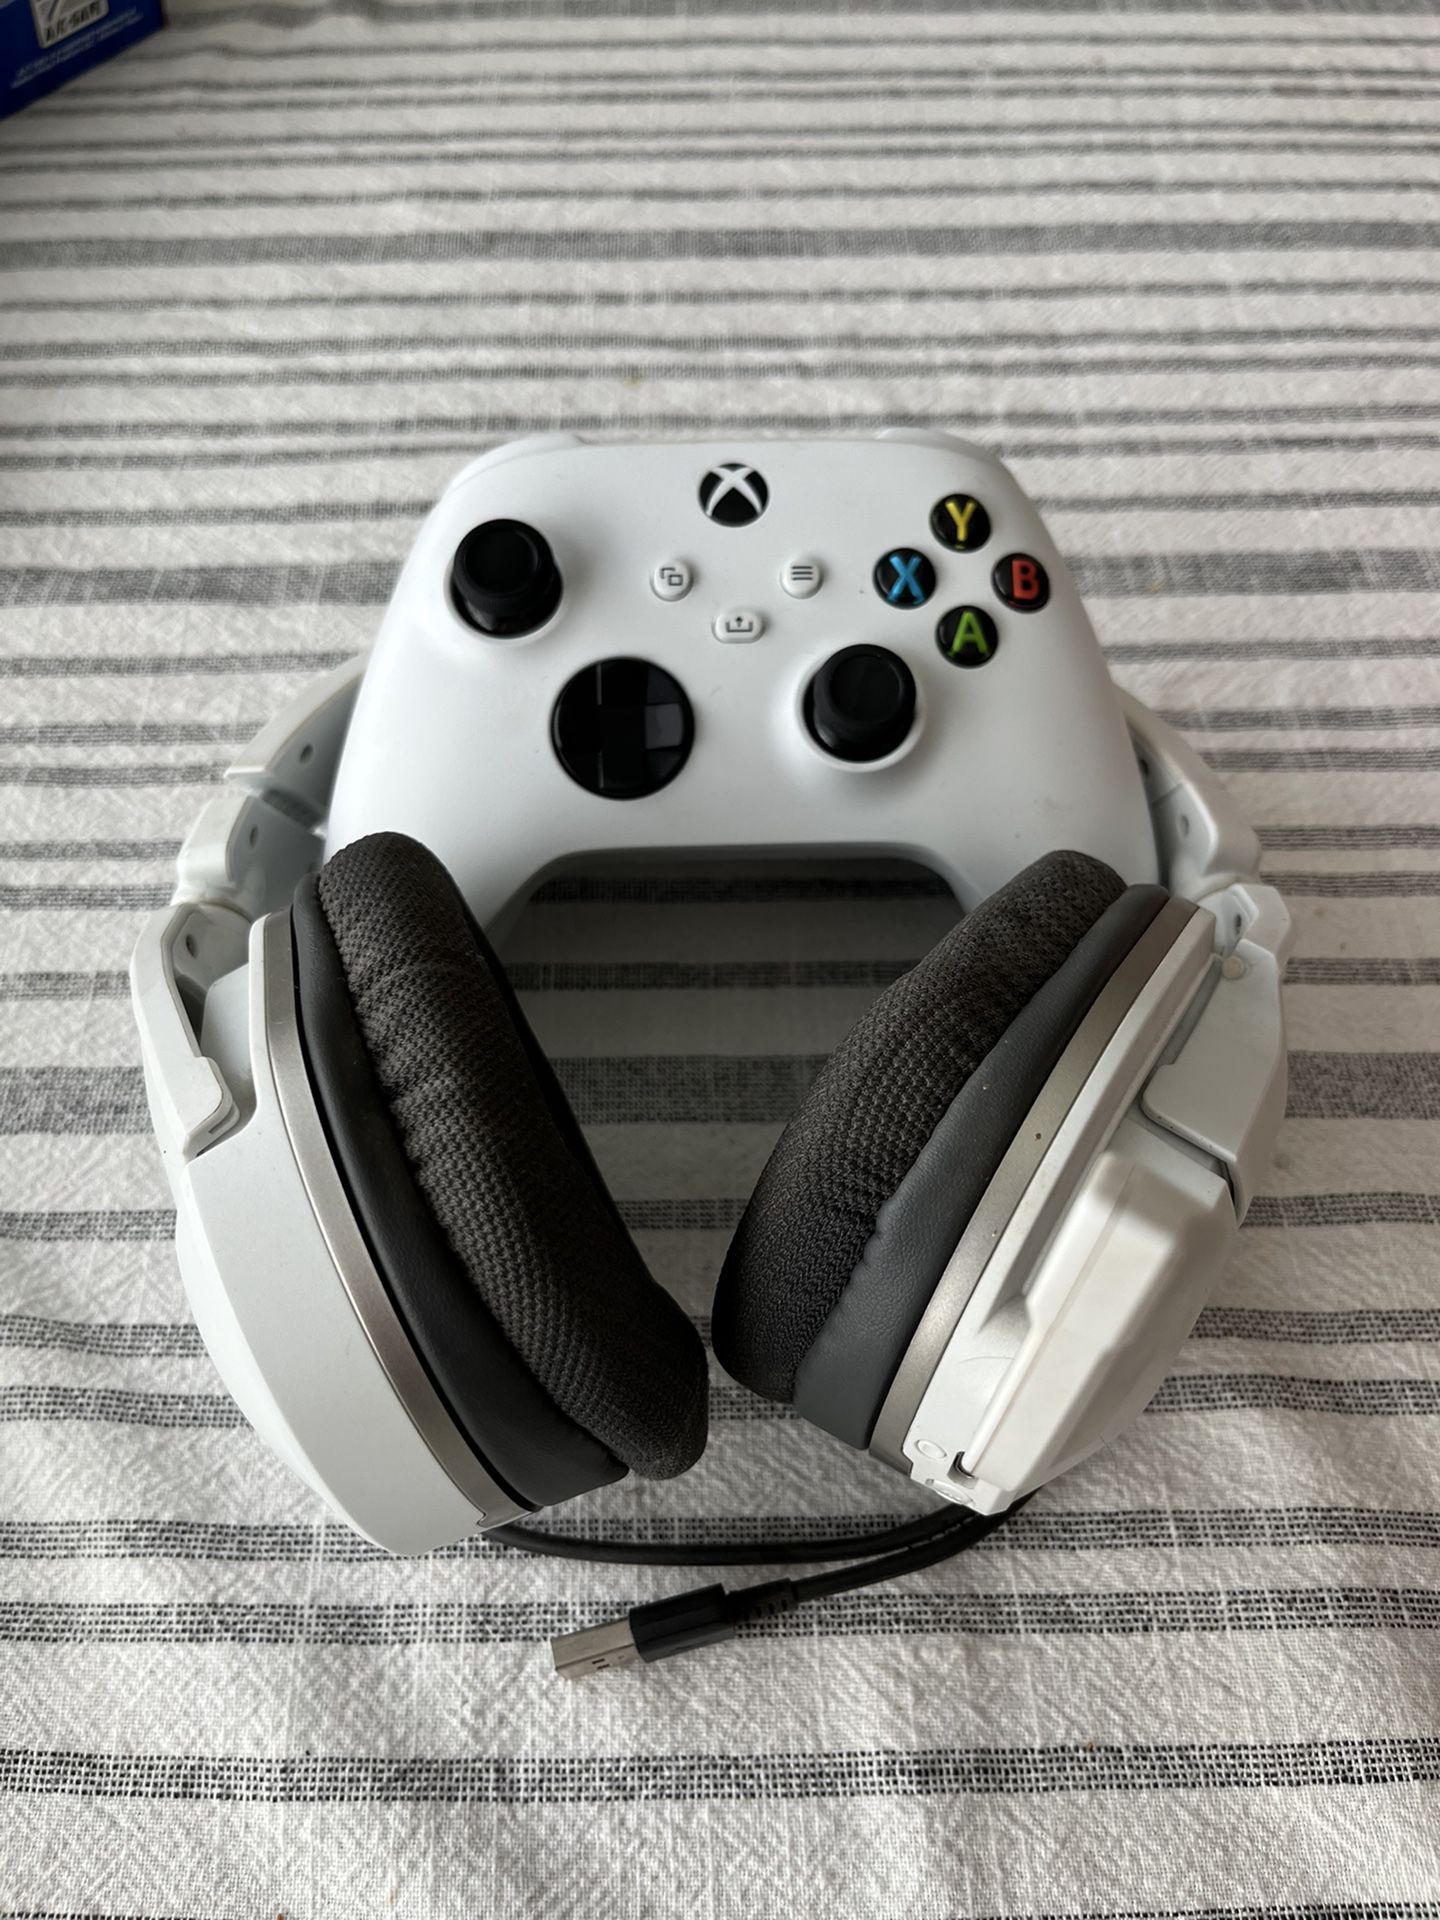 Xbox Series X or S Remote With Turtle Beach Headset and USB cable